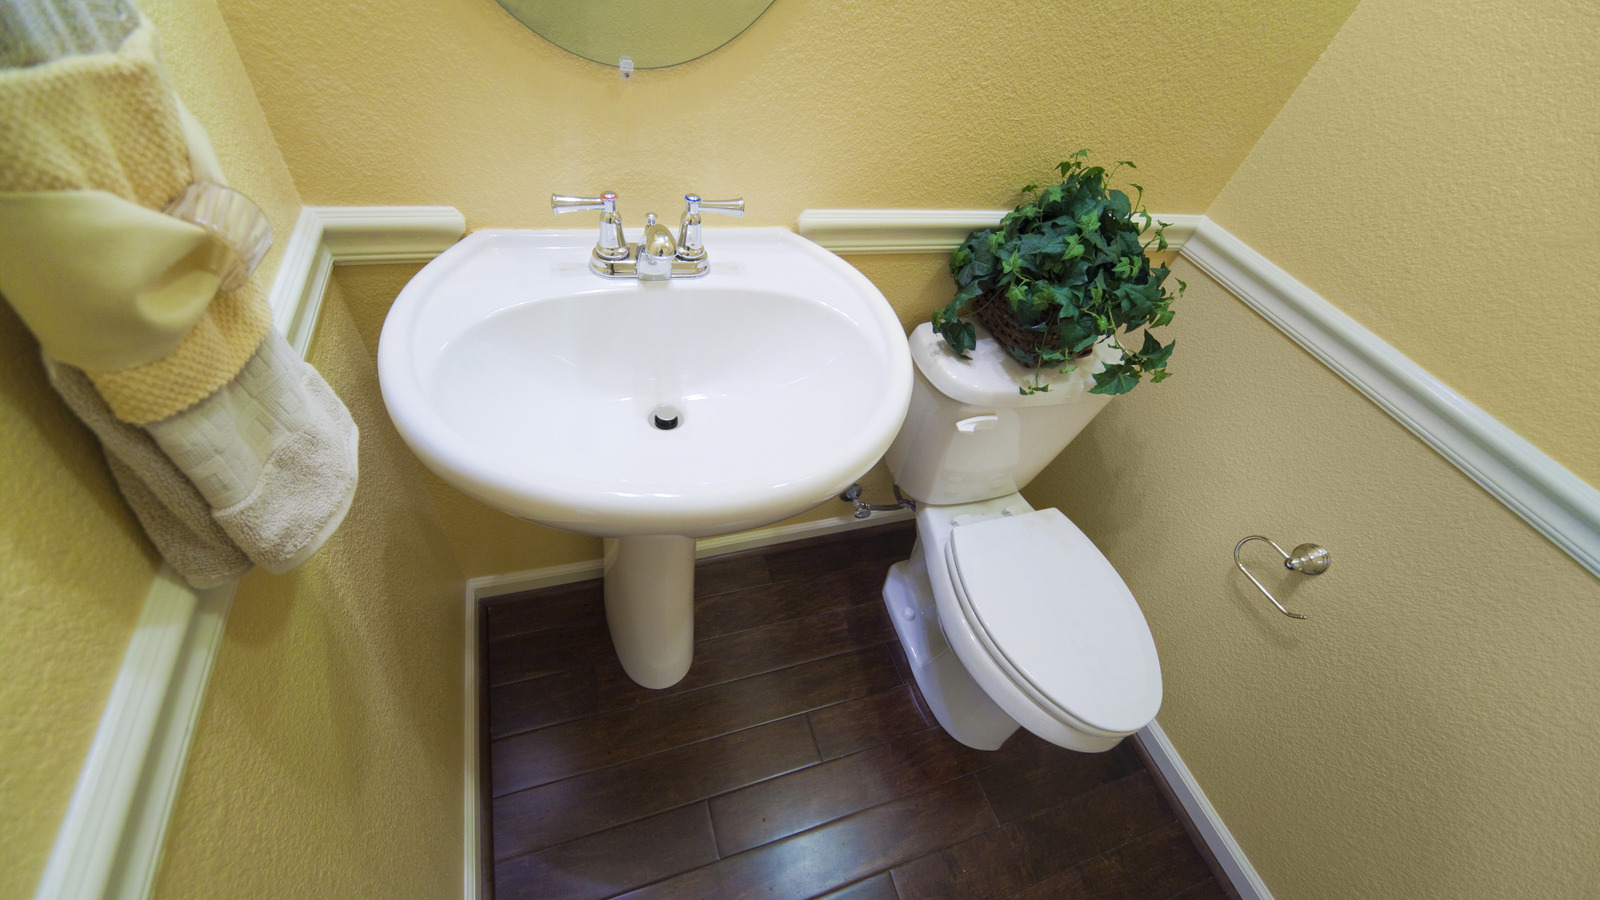 Nate Berkus' Top Tip For Maximizing Space In A Small Bathroom